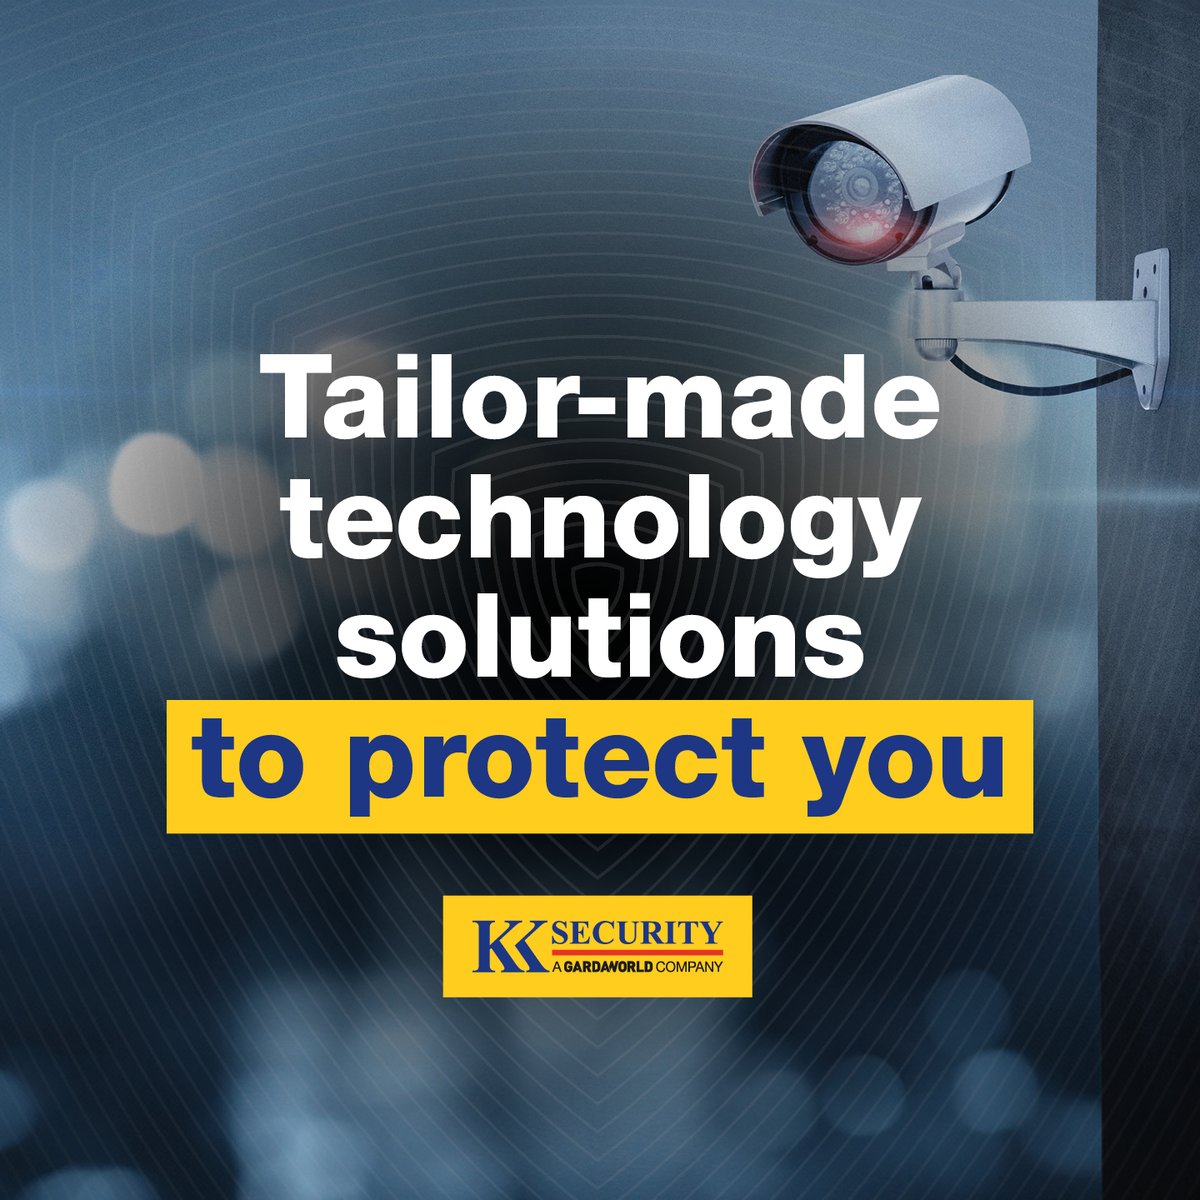 Tailor-made technology solutions to protect you. KK Security builds enterprise physical security that combines cutting edge technology with intelligent cloud–based software—all in a secure, user–friendly solution. #TechnologyIntegration #SecureSolutions #KKSecurity